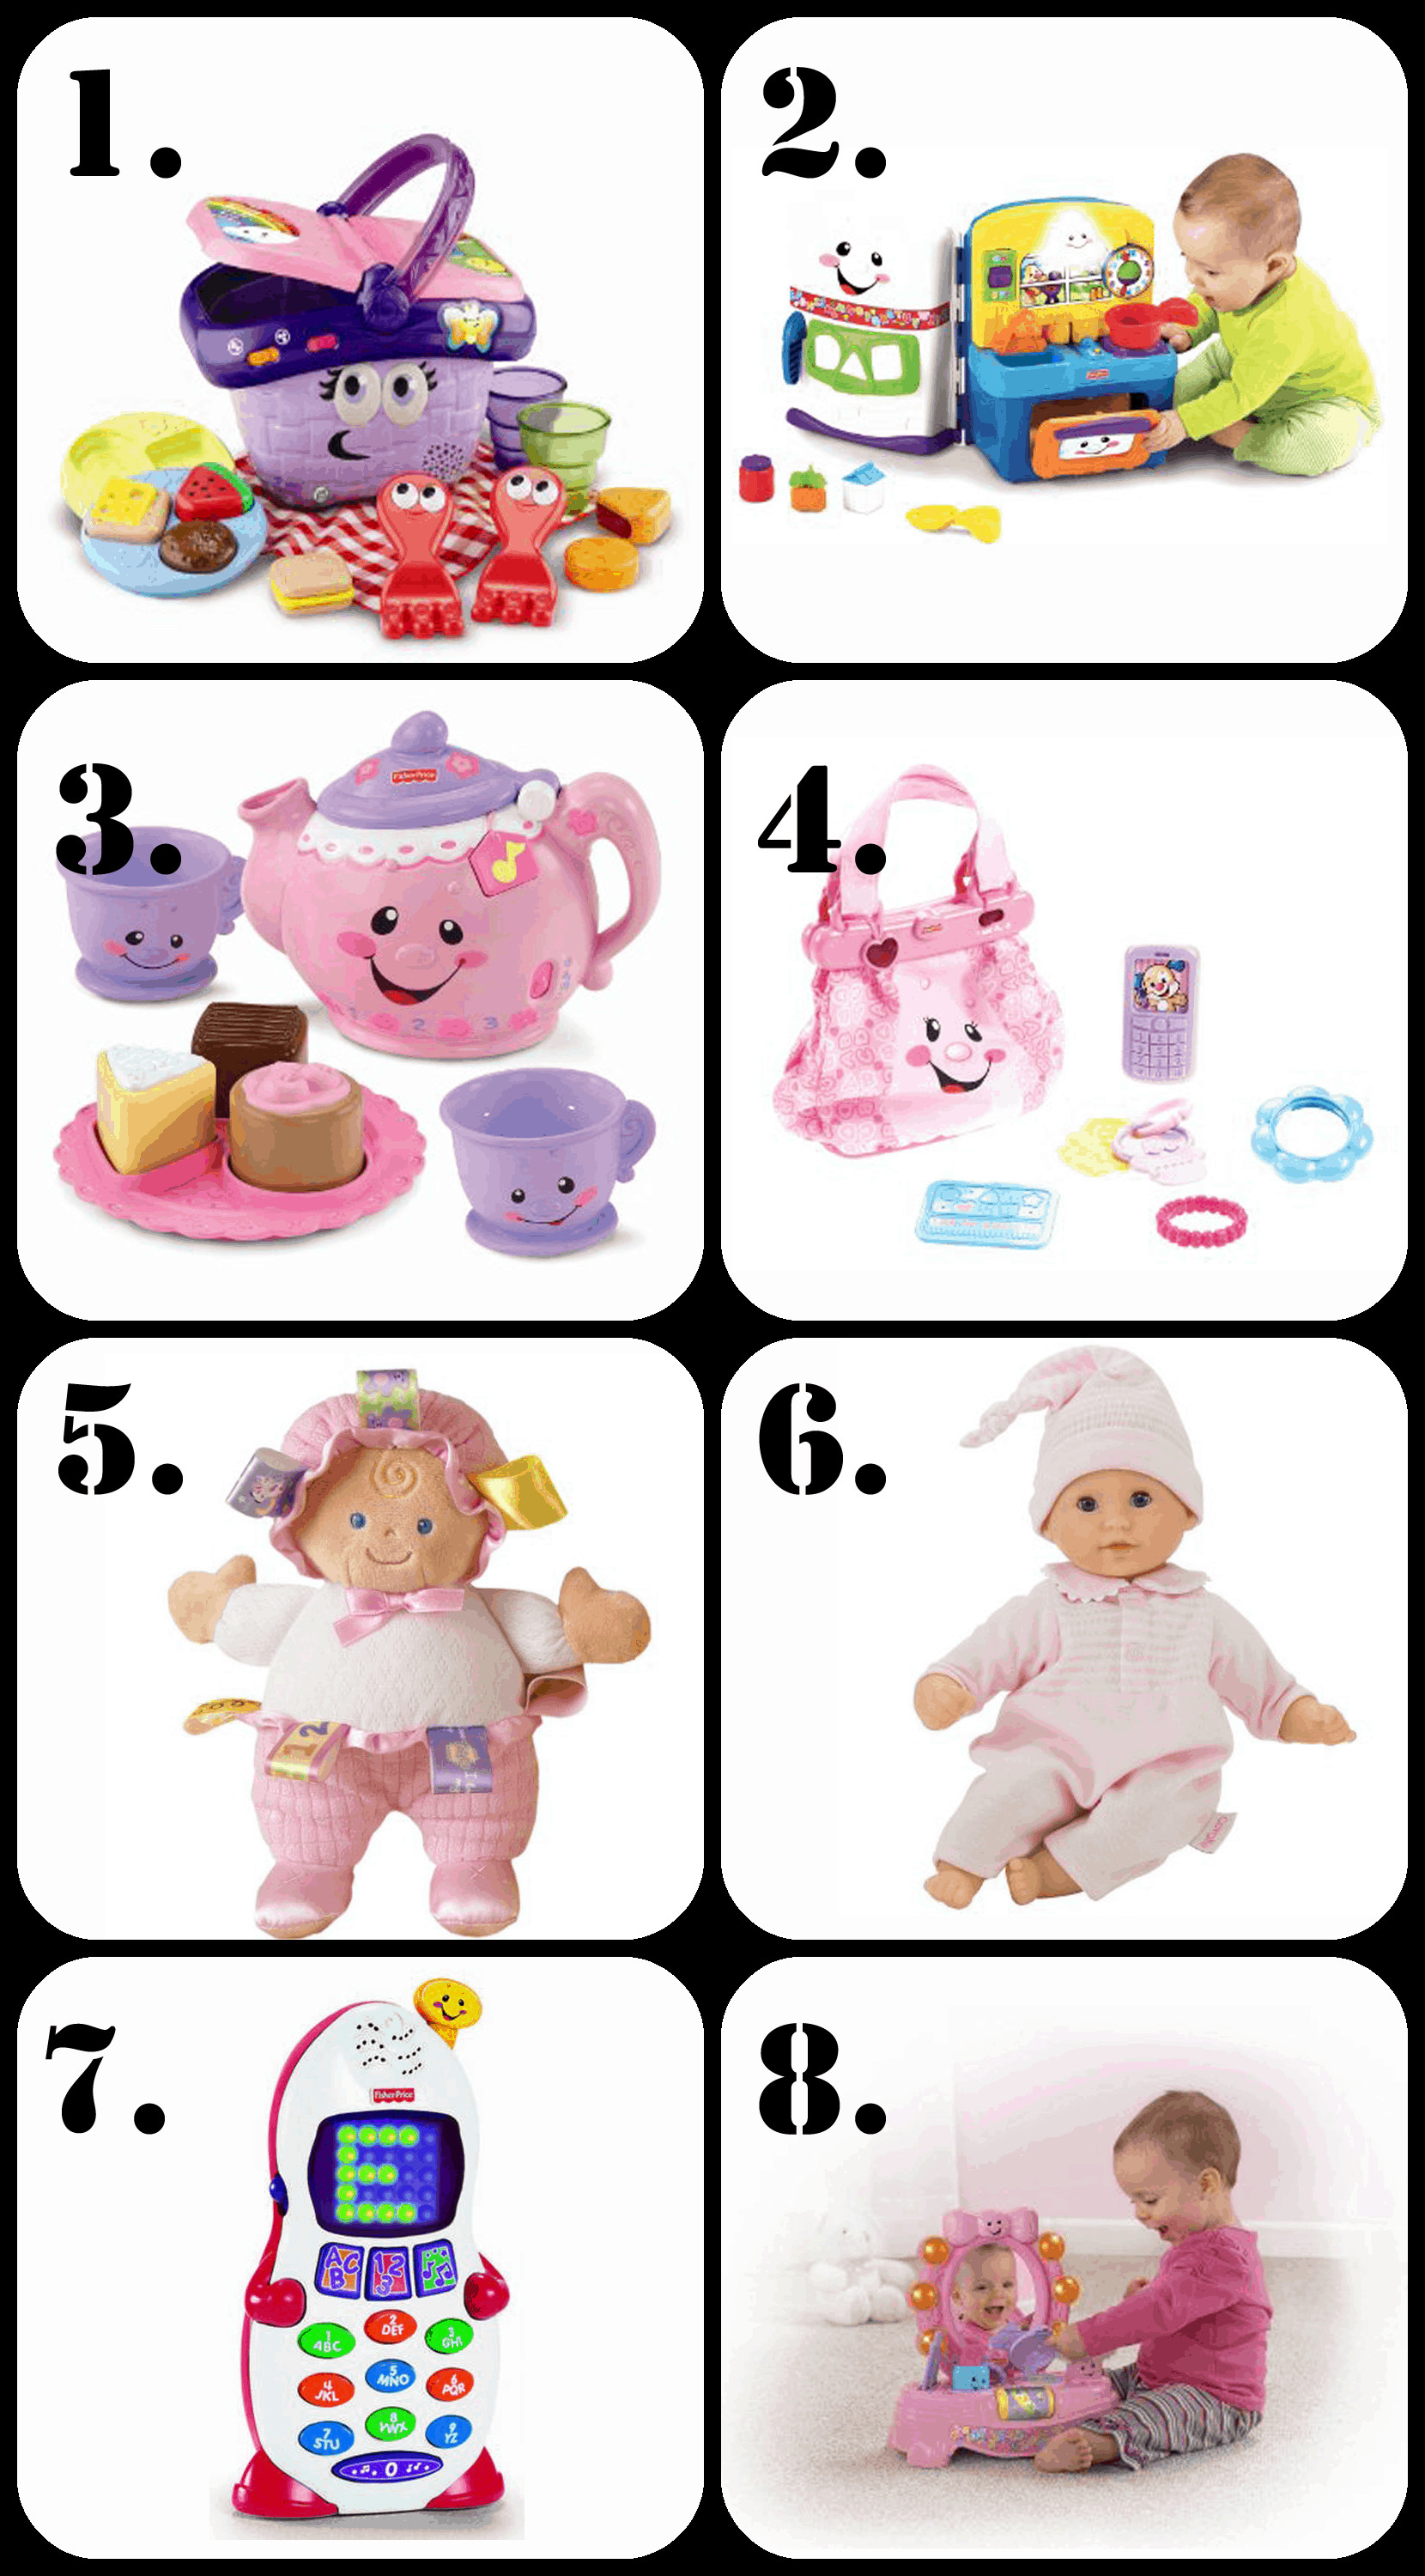 Christmas Gift Ideas For 1 Year Old Boys
 The Ultimate List of Gift Ideas for a 1 Year Old Girl